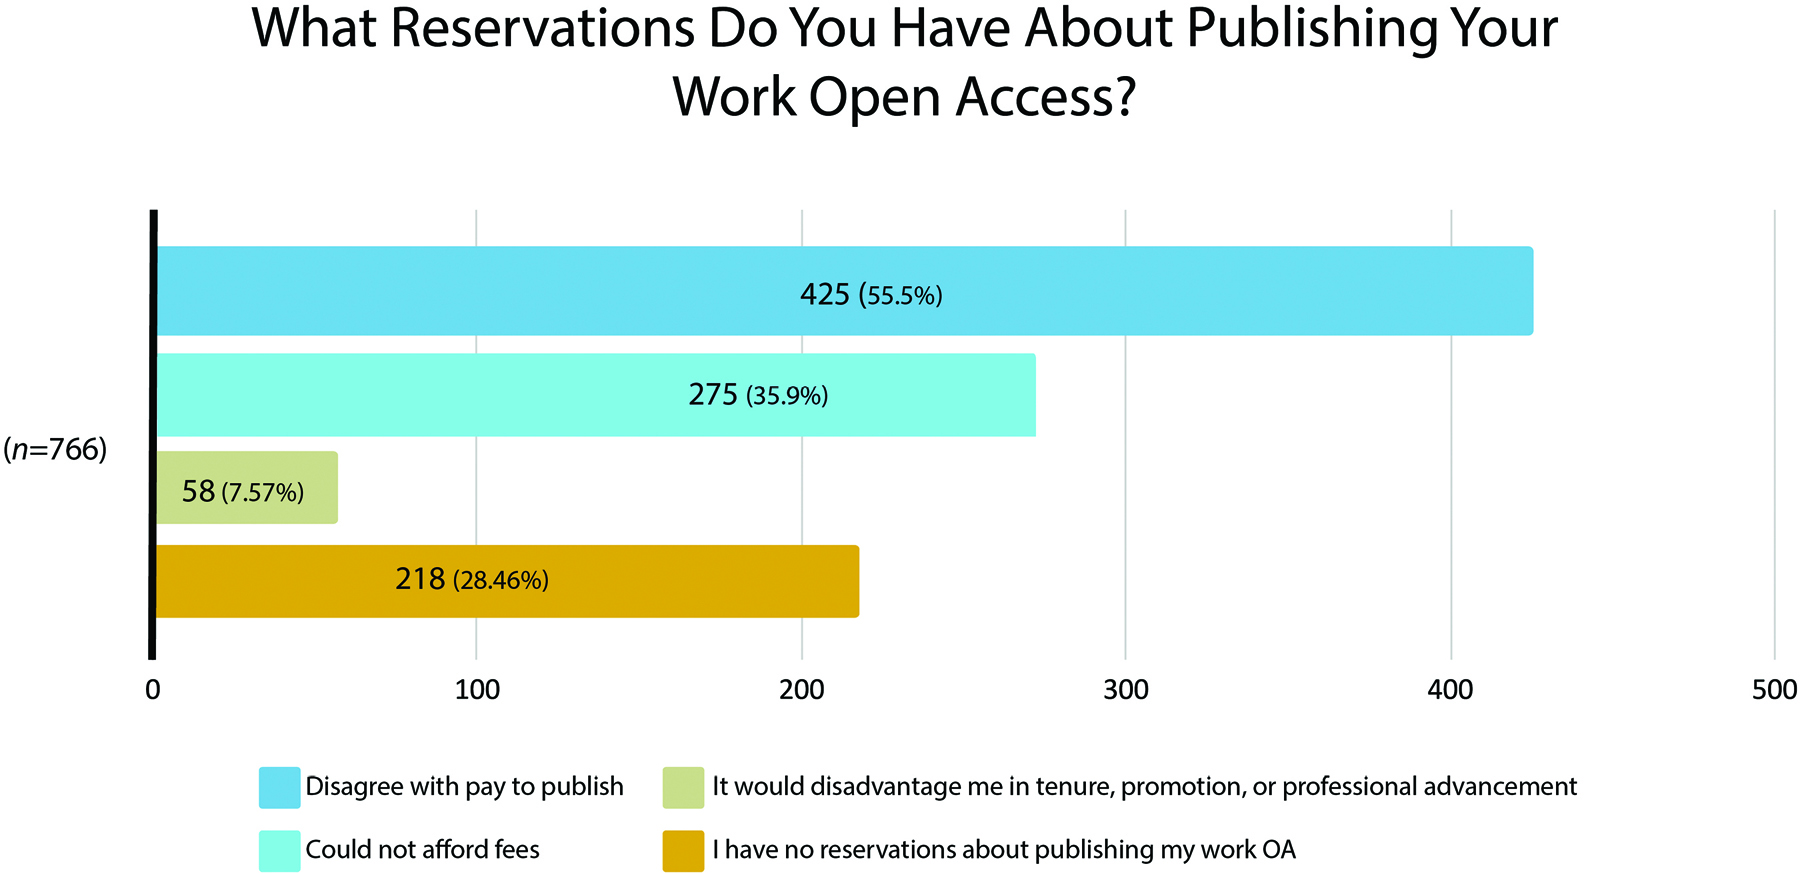 A horizontal bar chart with four bars that represent different answers to the question “what reservations do you have about publishing your work open access?” from the entire survey population, where n=766 The first bar represents the answer “Disagree with Pay to publish”, which had 425 respondents, or 55.5% of respondents to the question. The second bar represents the response “Could not afford to publish” and that included 275 respondents, or 35.9%. The third bar was “it would disadvantage me in tenure, promotion, or professional advancement” which had 58 answers, 7.57%. Finally, the fourth bar represented the response “I have no reservations about publishing my work OA” and this had 218 responses, or 28.46%.